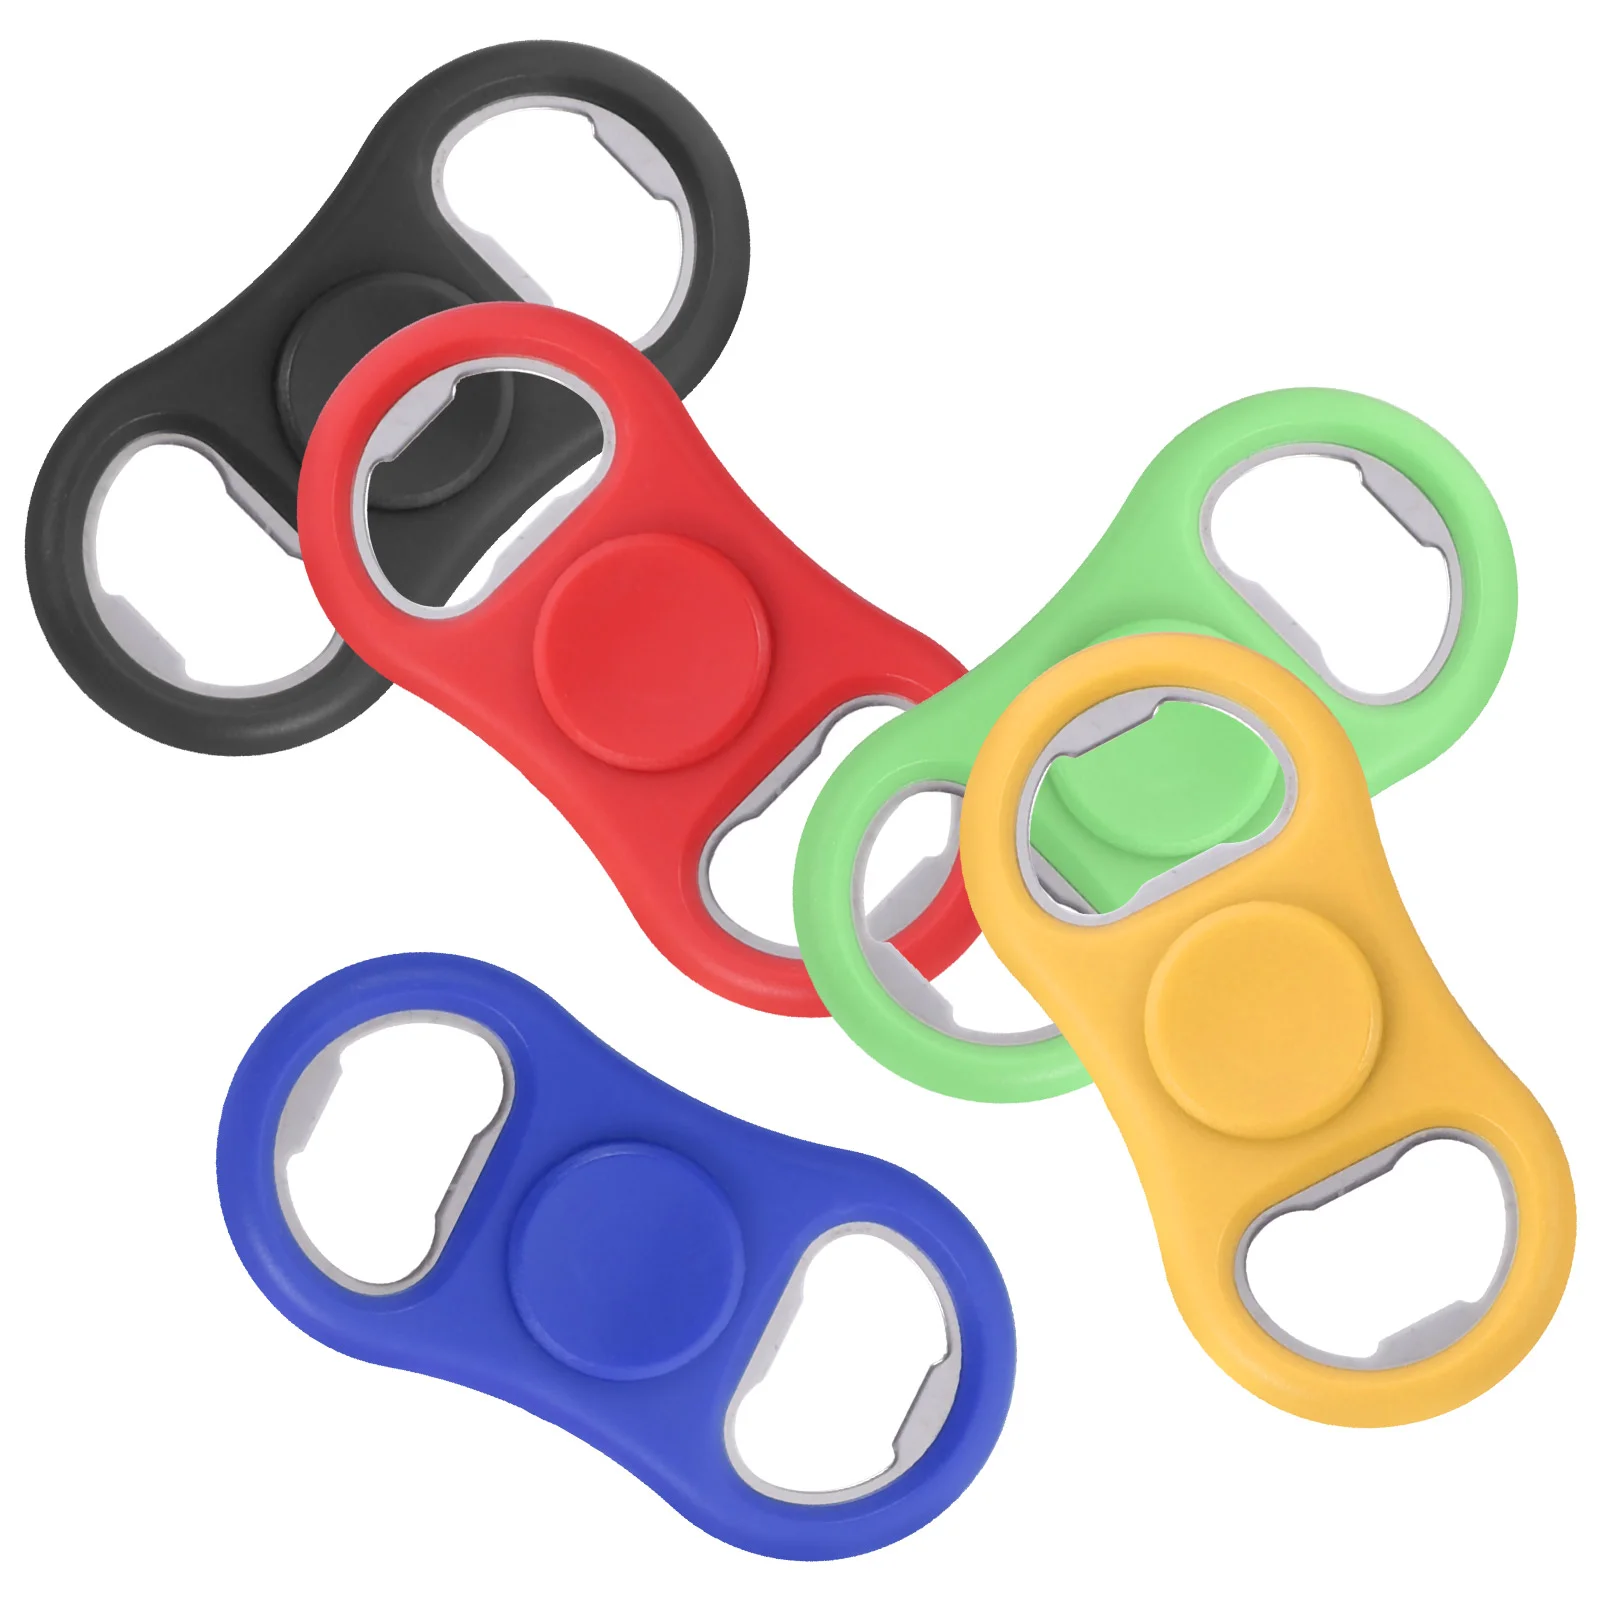 

5 Pcs Beer Opener Bottle Lid Remover Openers Drinks Party Abs Rotation Opening Tool Tools